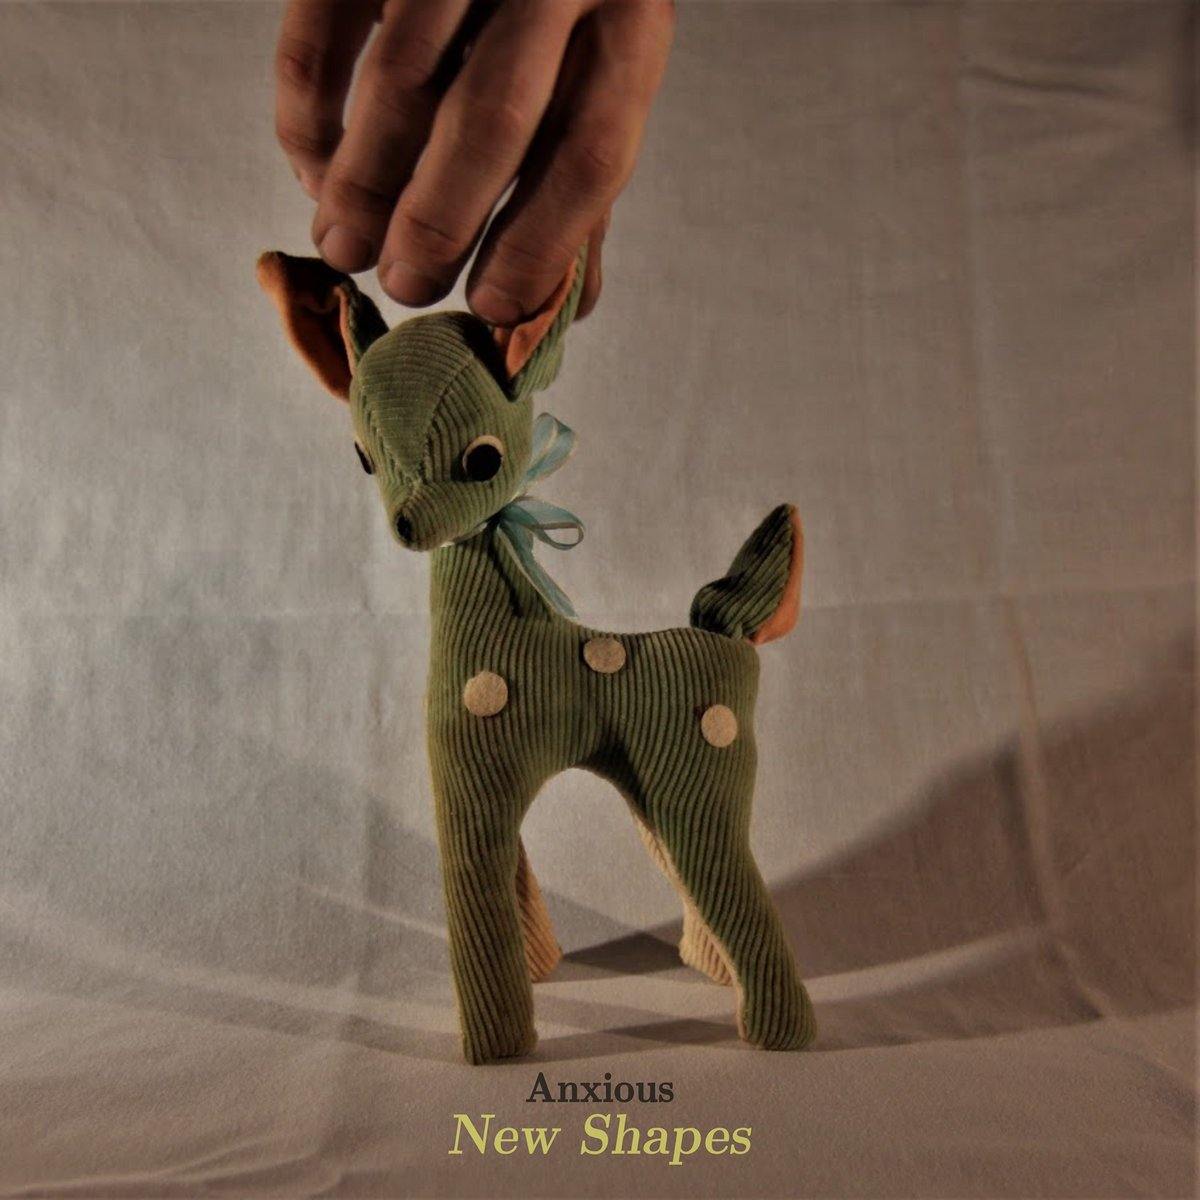 Buy – Anxious "New Shapes" 7" – Band & Music Merch – Cold Cuts Merch